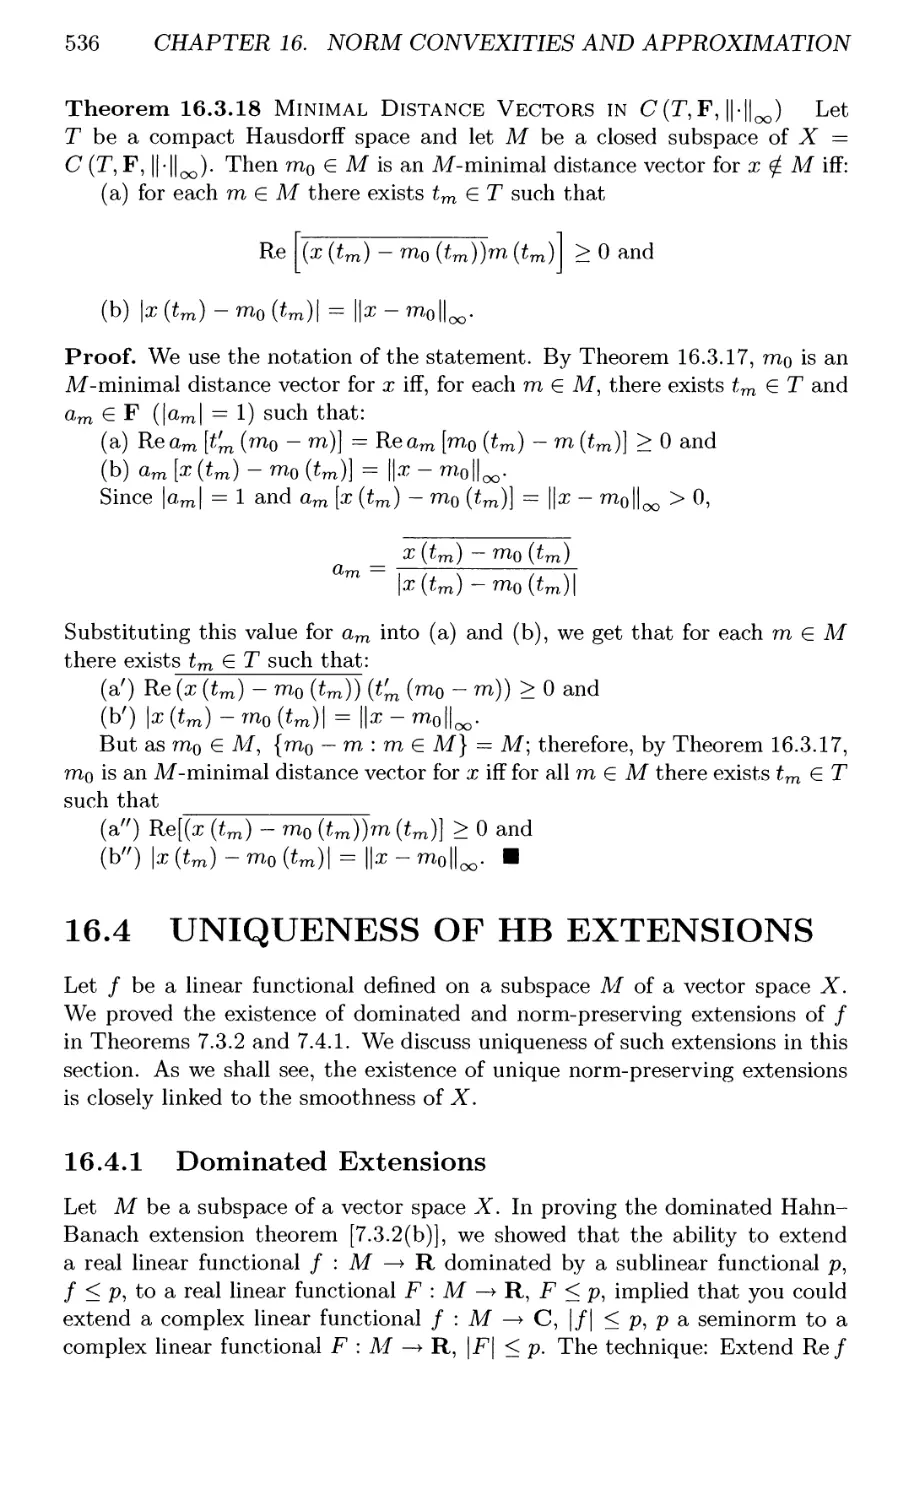 16.4 UNIQUENESS OF HB EXTENSIONS